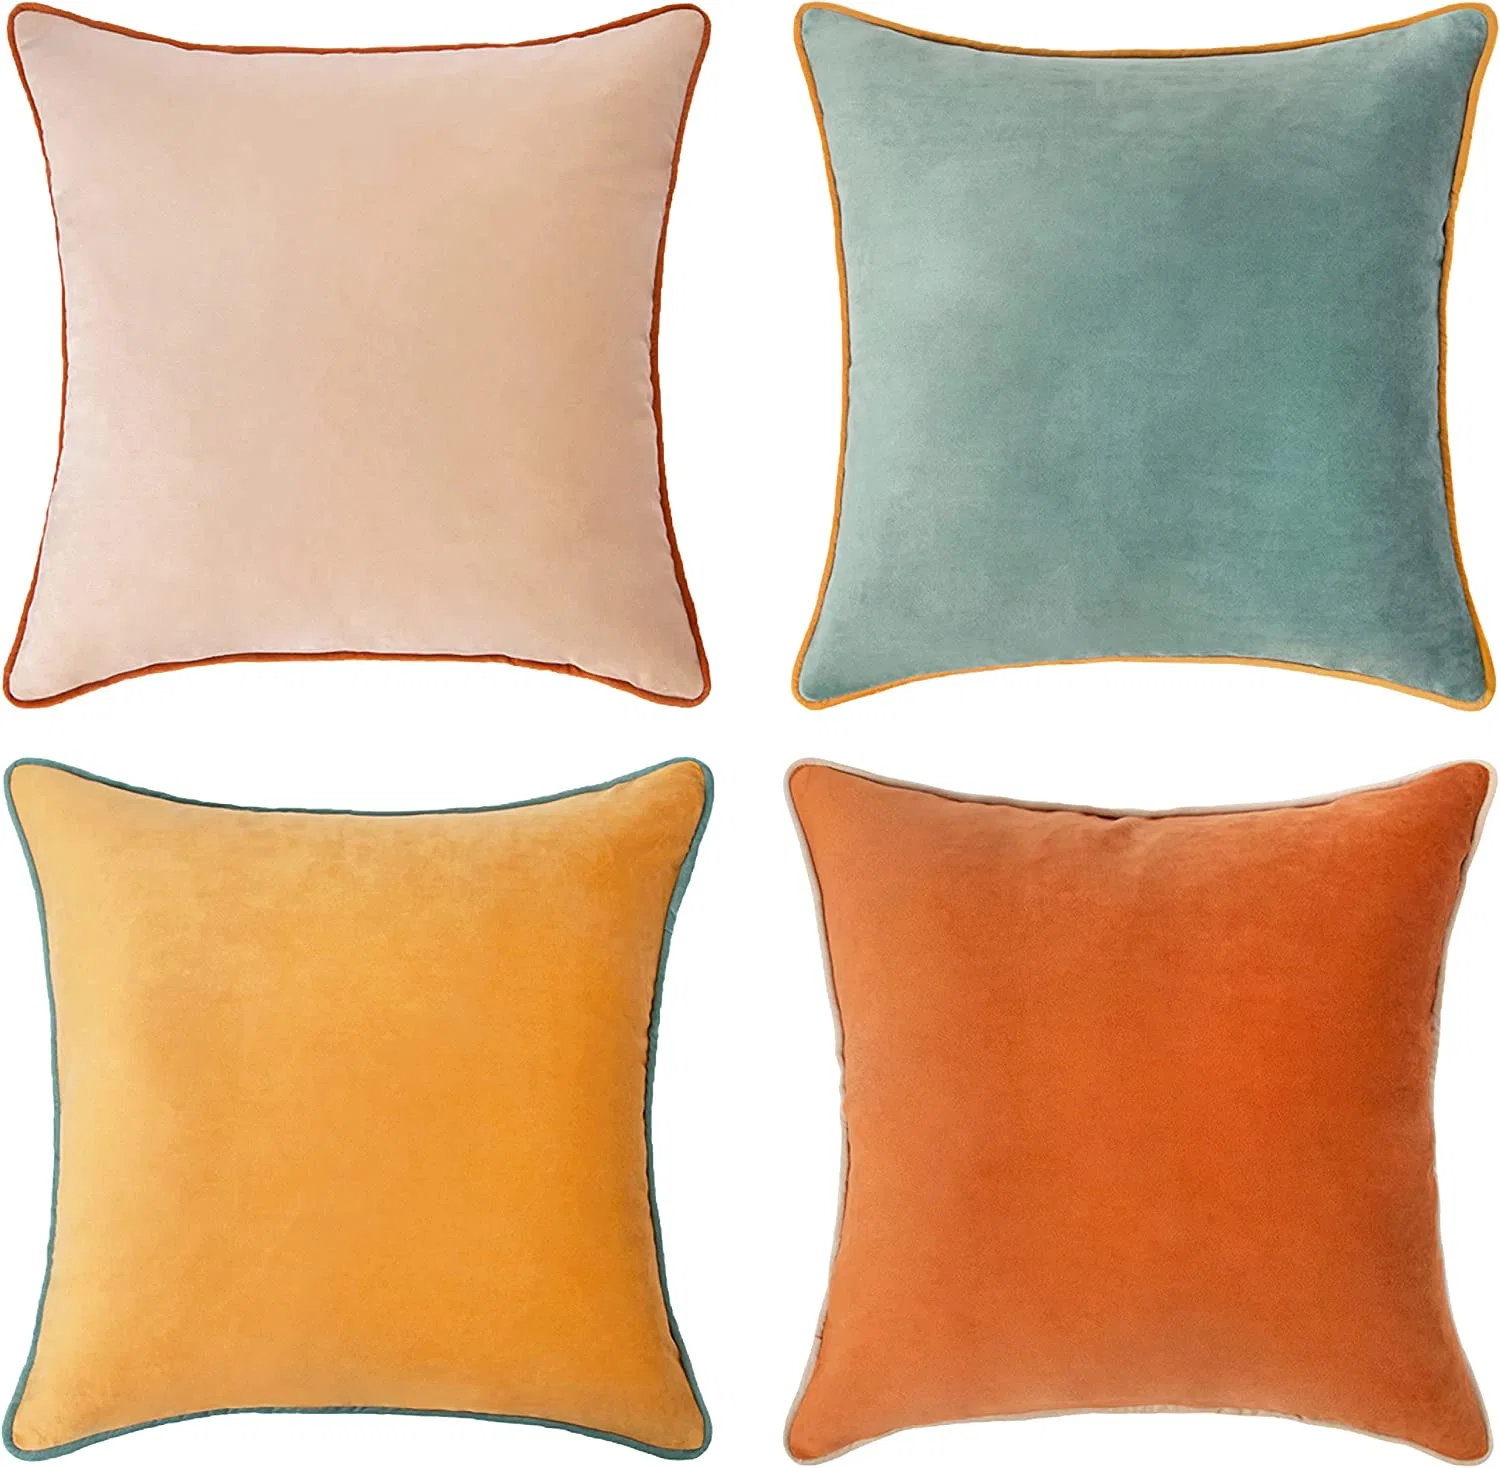 Throw Pillow Covers Cushion Cases, Set of 4 Soft, Pillow Inserts Not Included